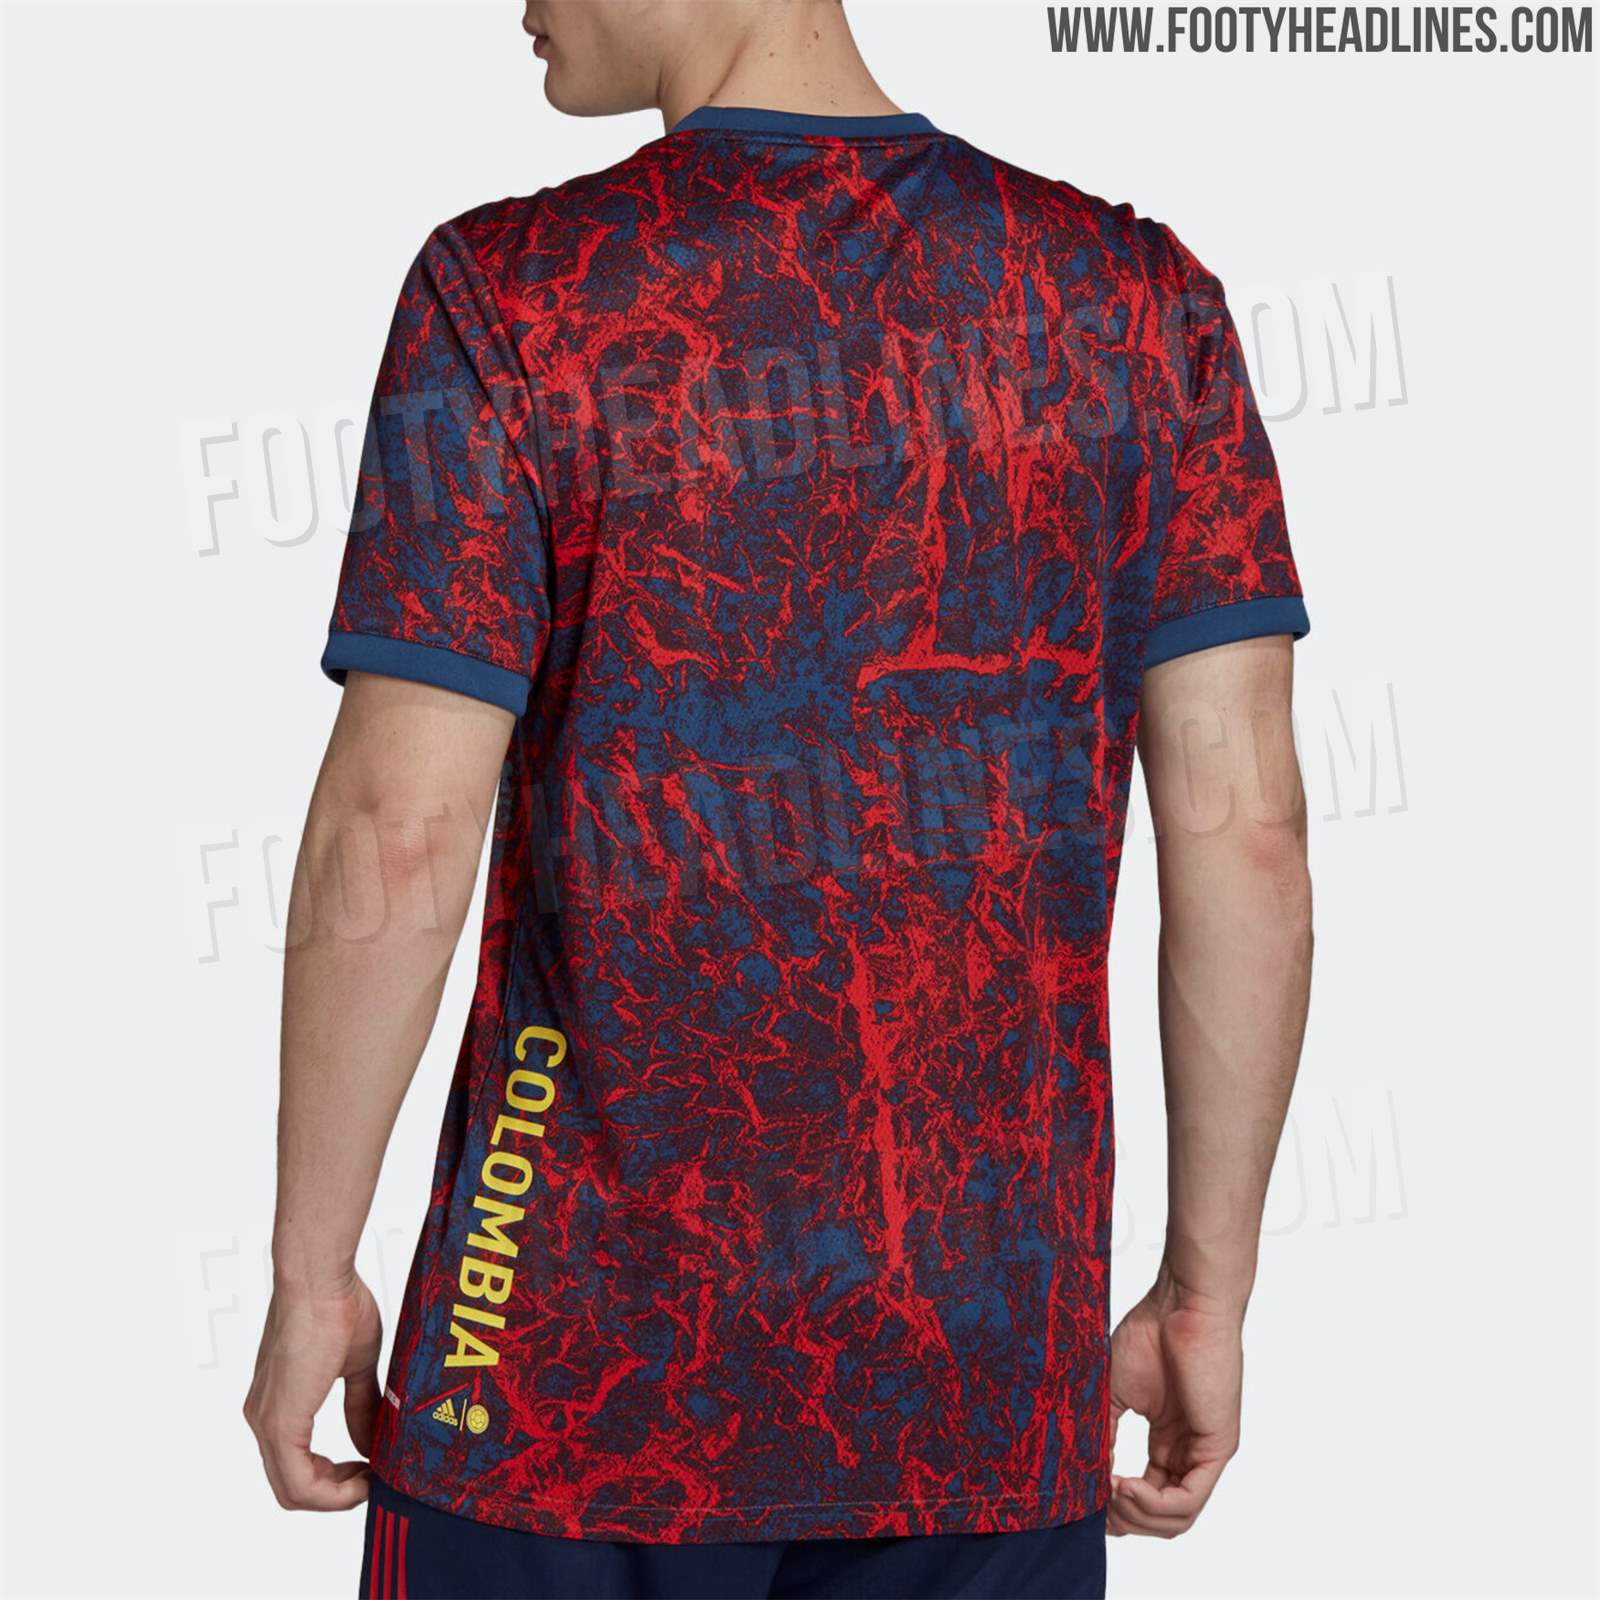 Bold Colombia Copa America 2020 Pre-Match Shirt Leaked - Footy Headlines